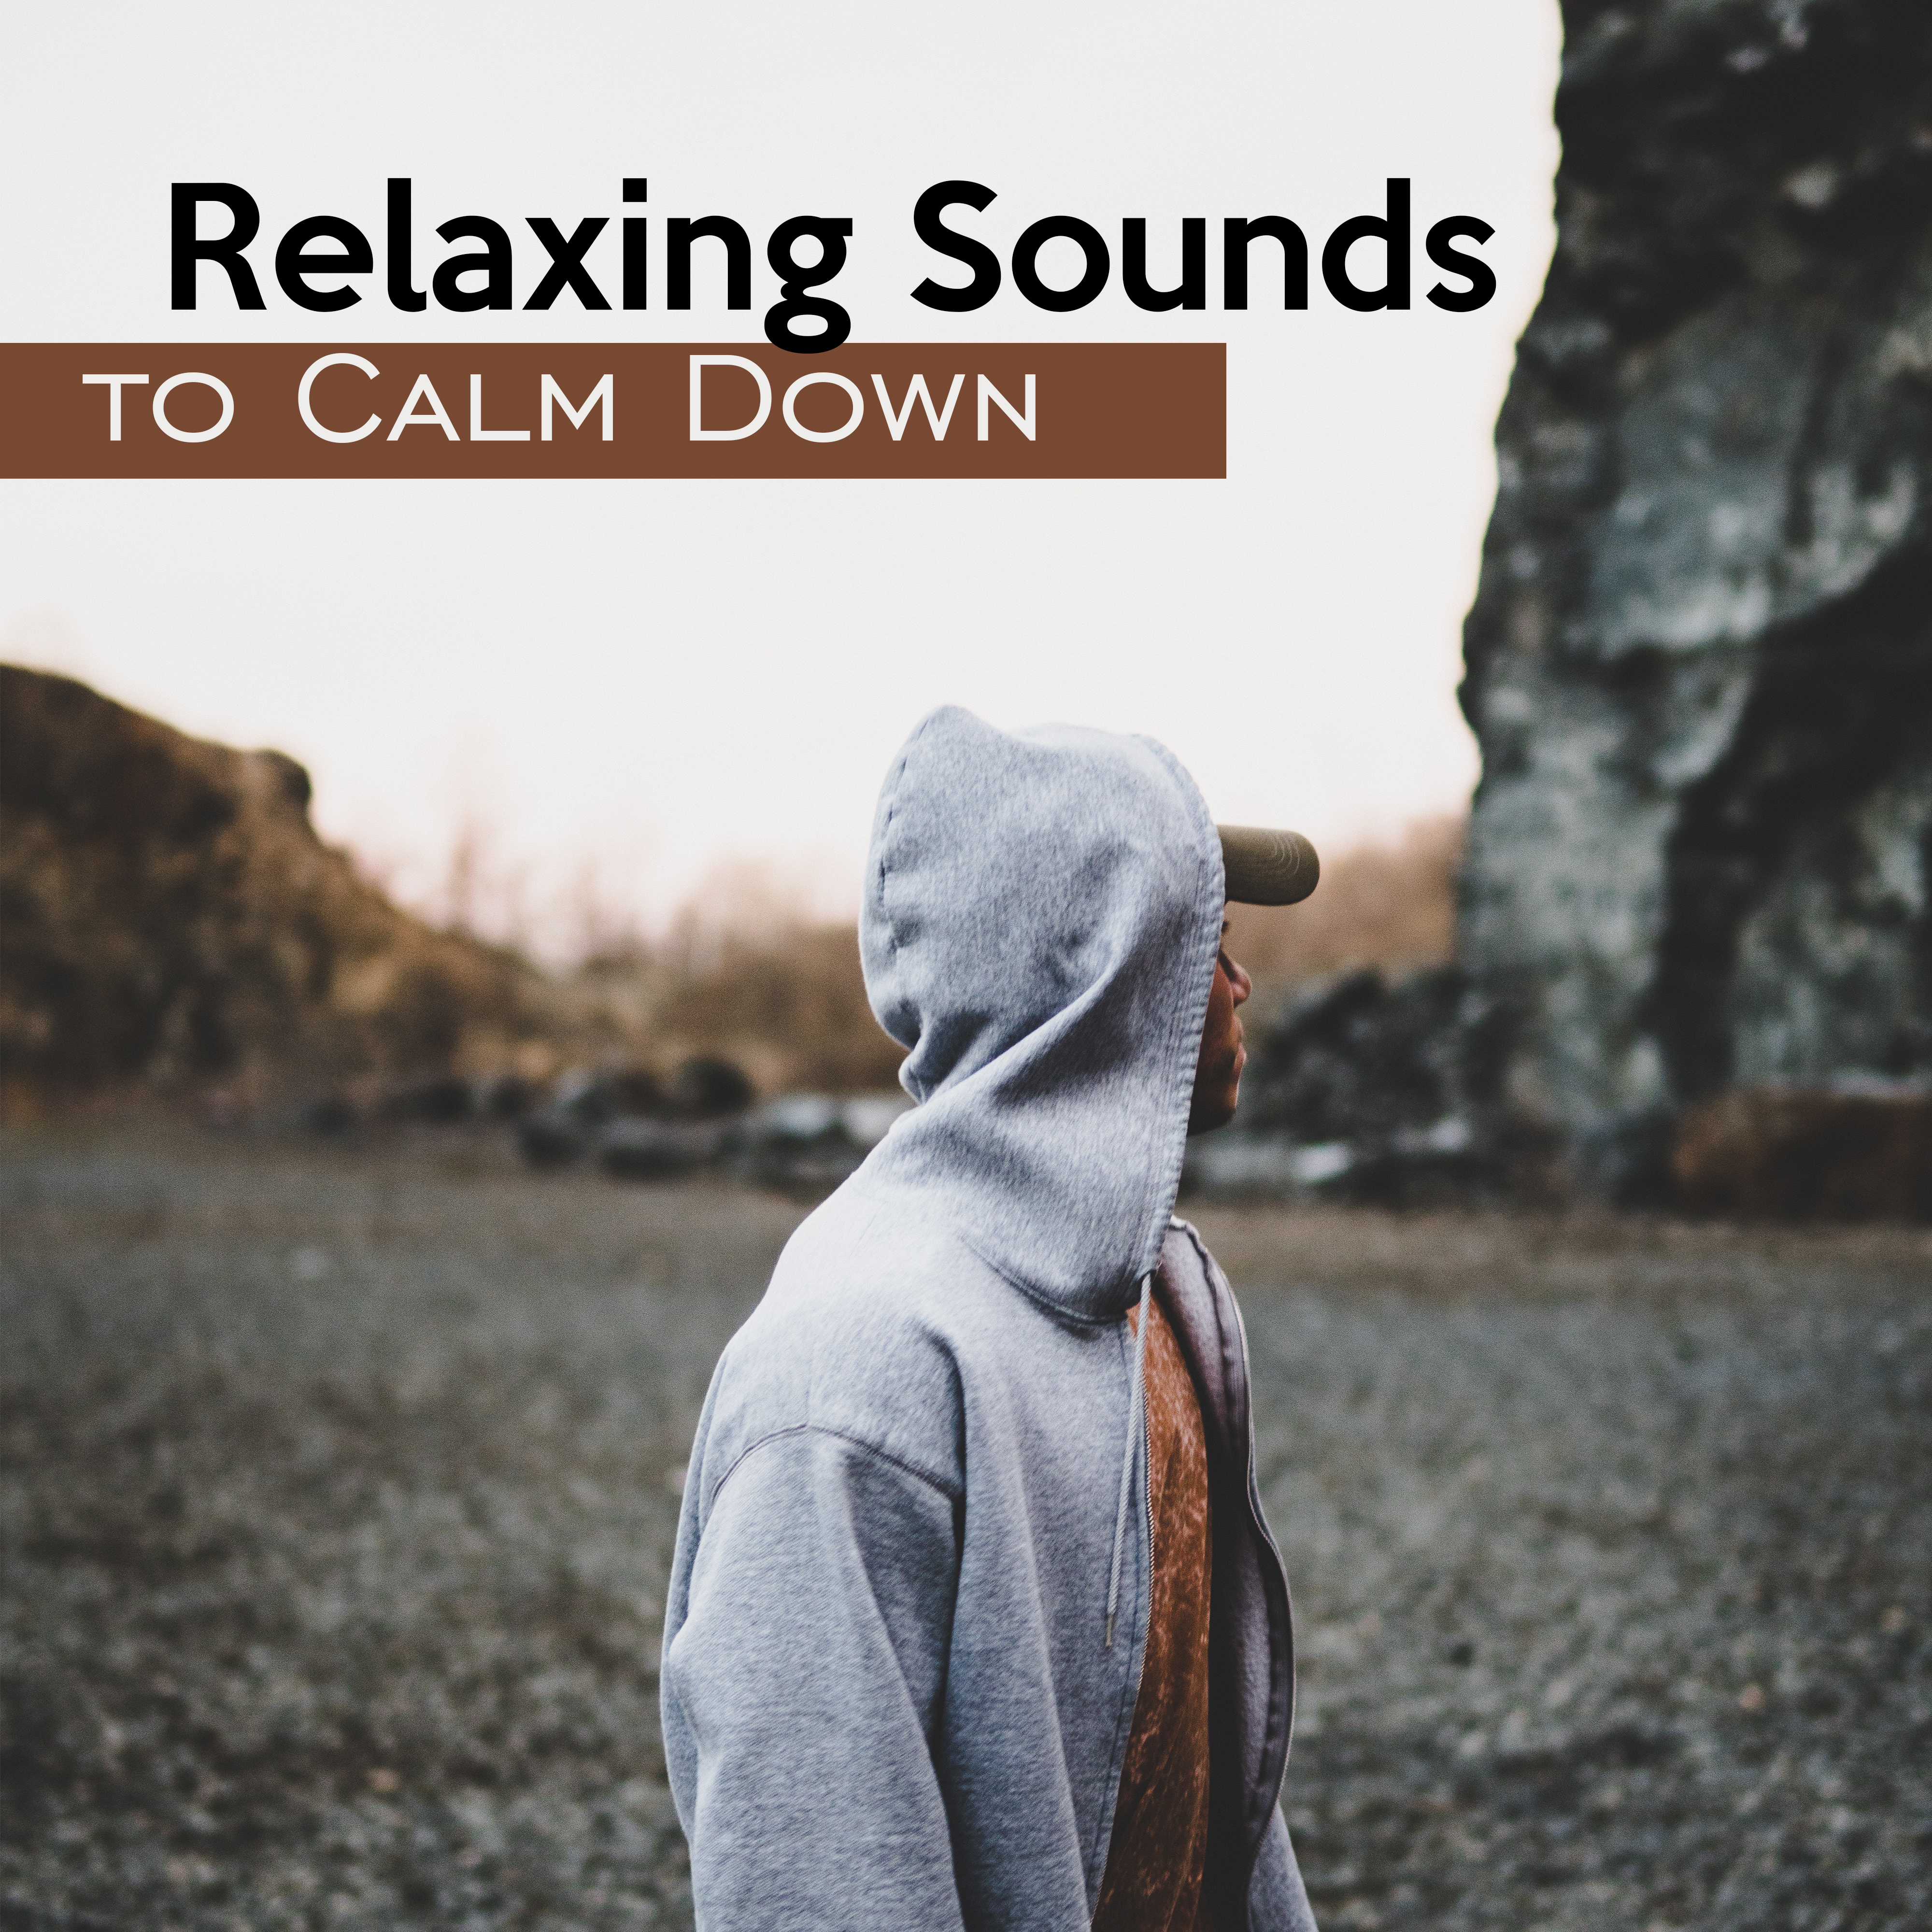 Relaxing Sounds to Calm Down – Healing Music, Peaceful Mind, Rest a Bit, Relaxation Sounds